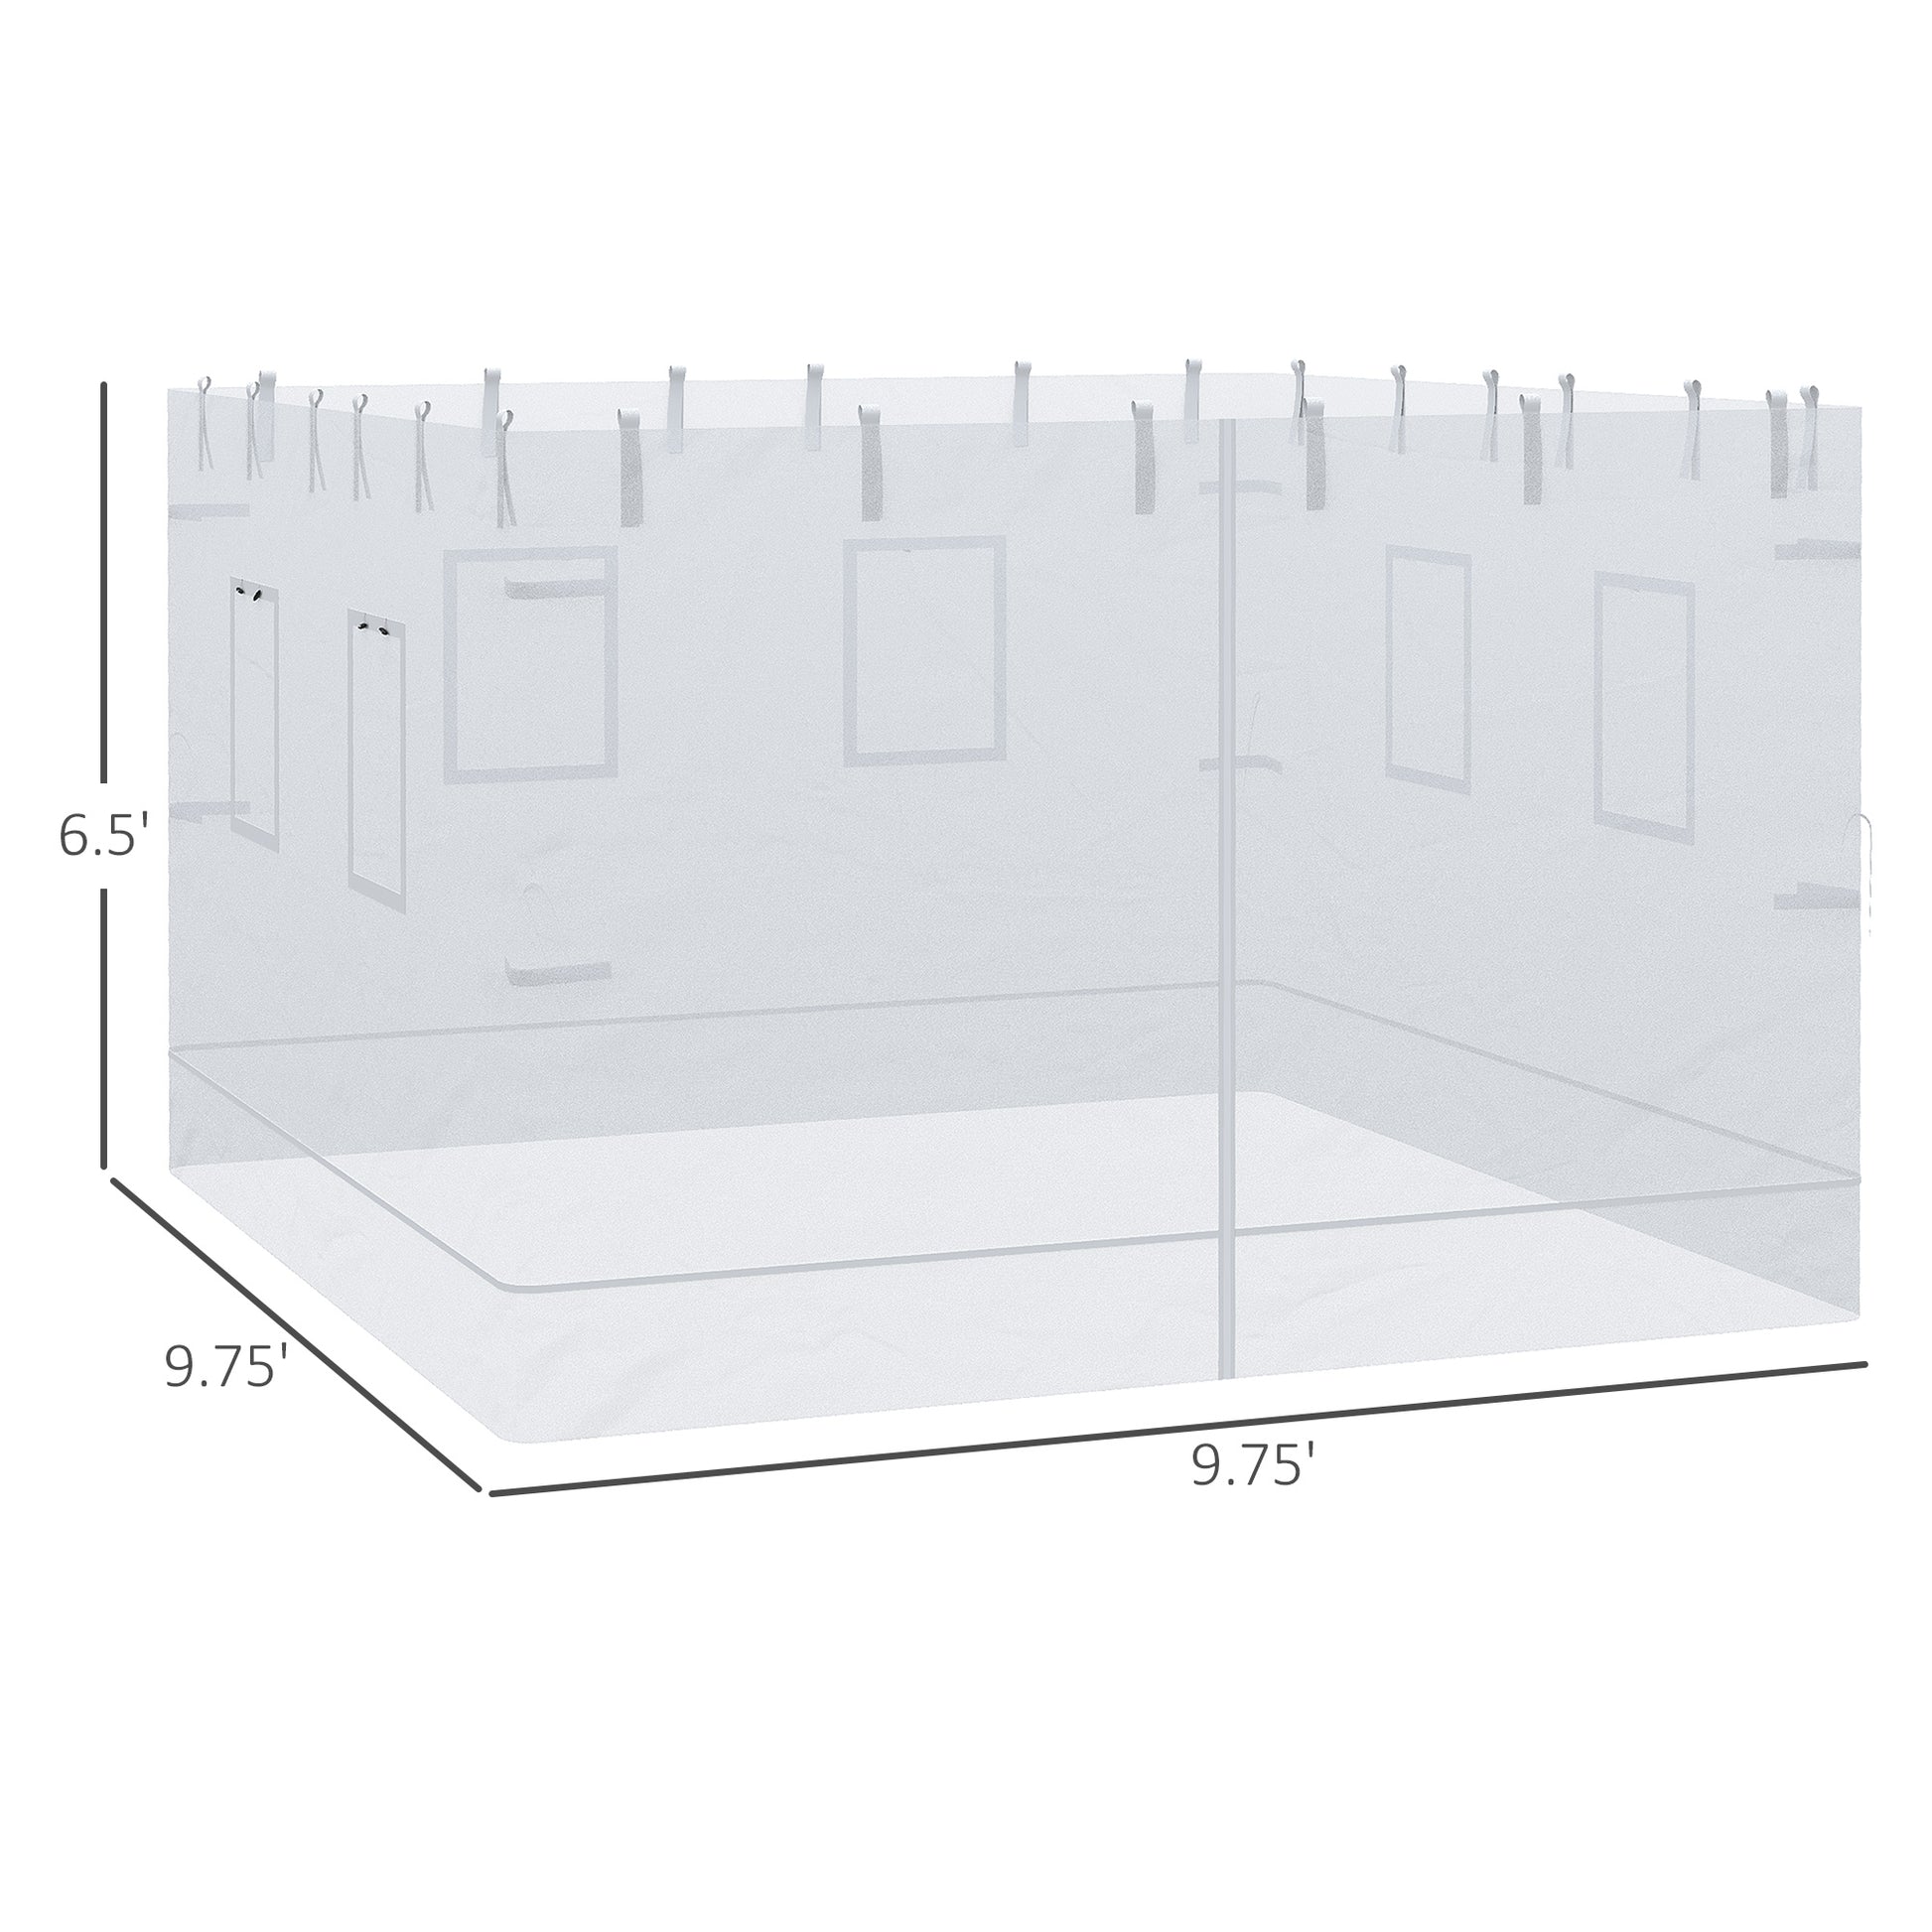 Pop up Canopy Walls, Universal Replacement